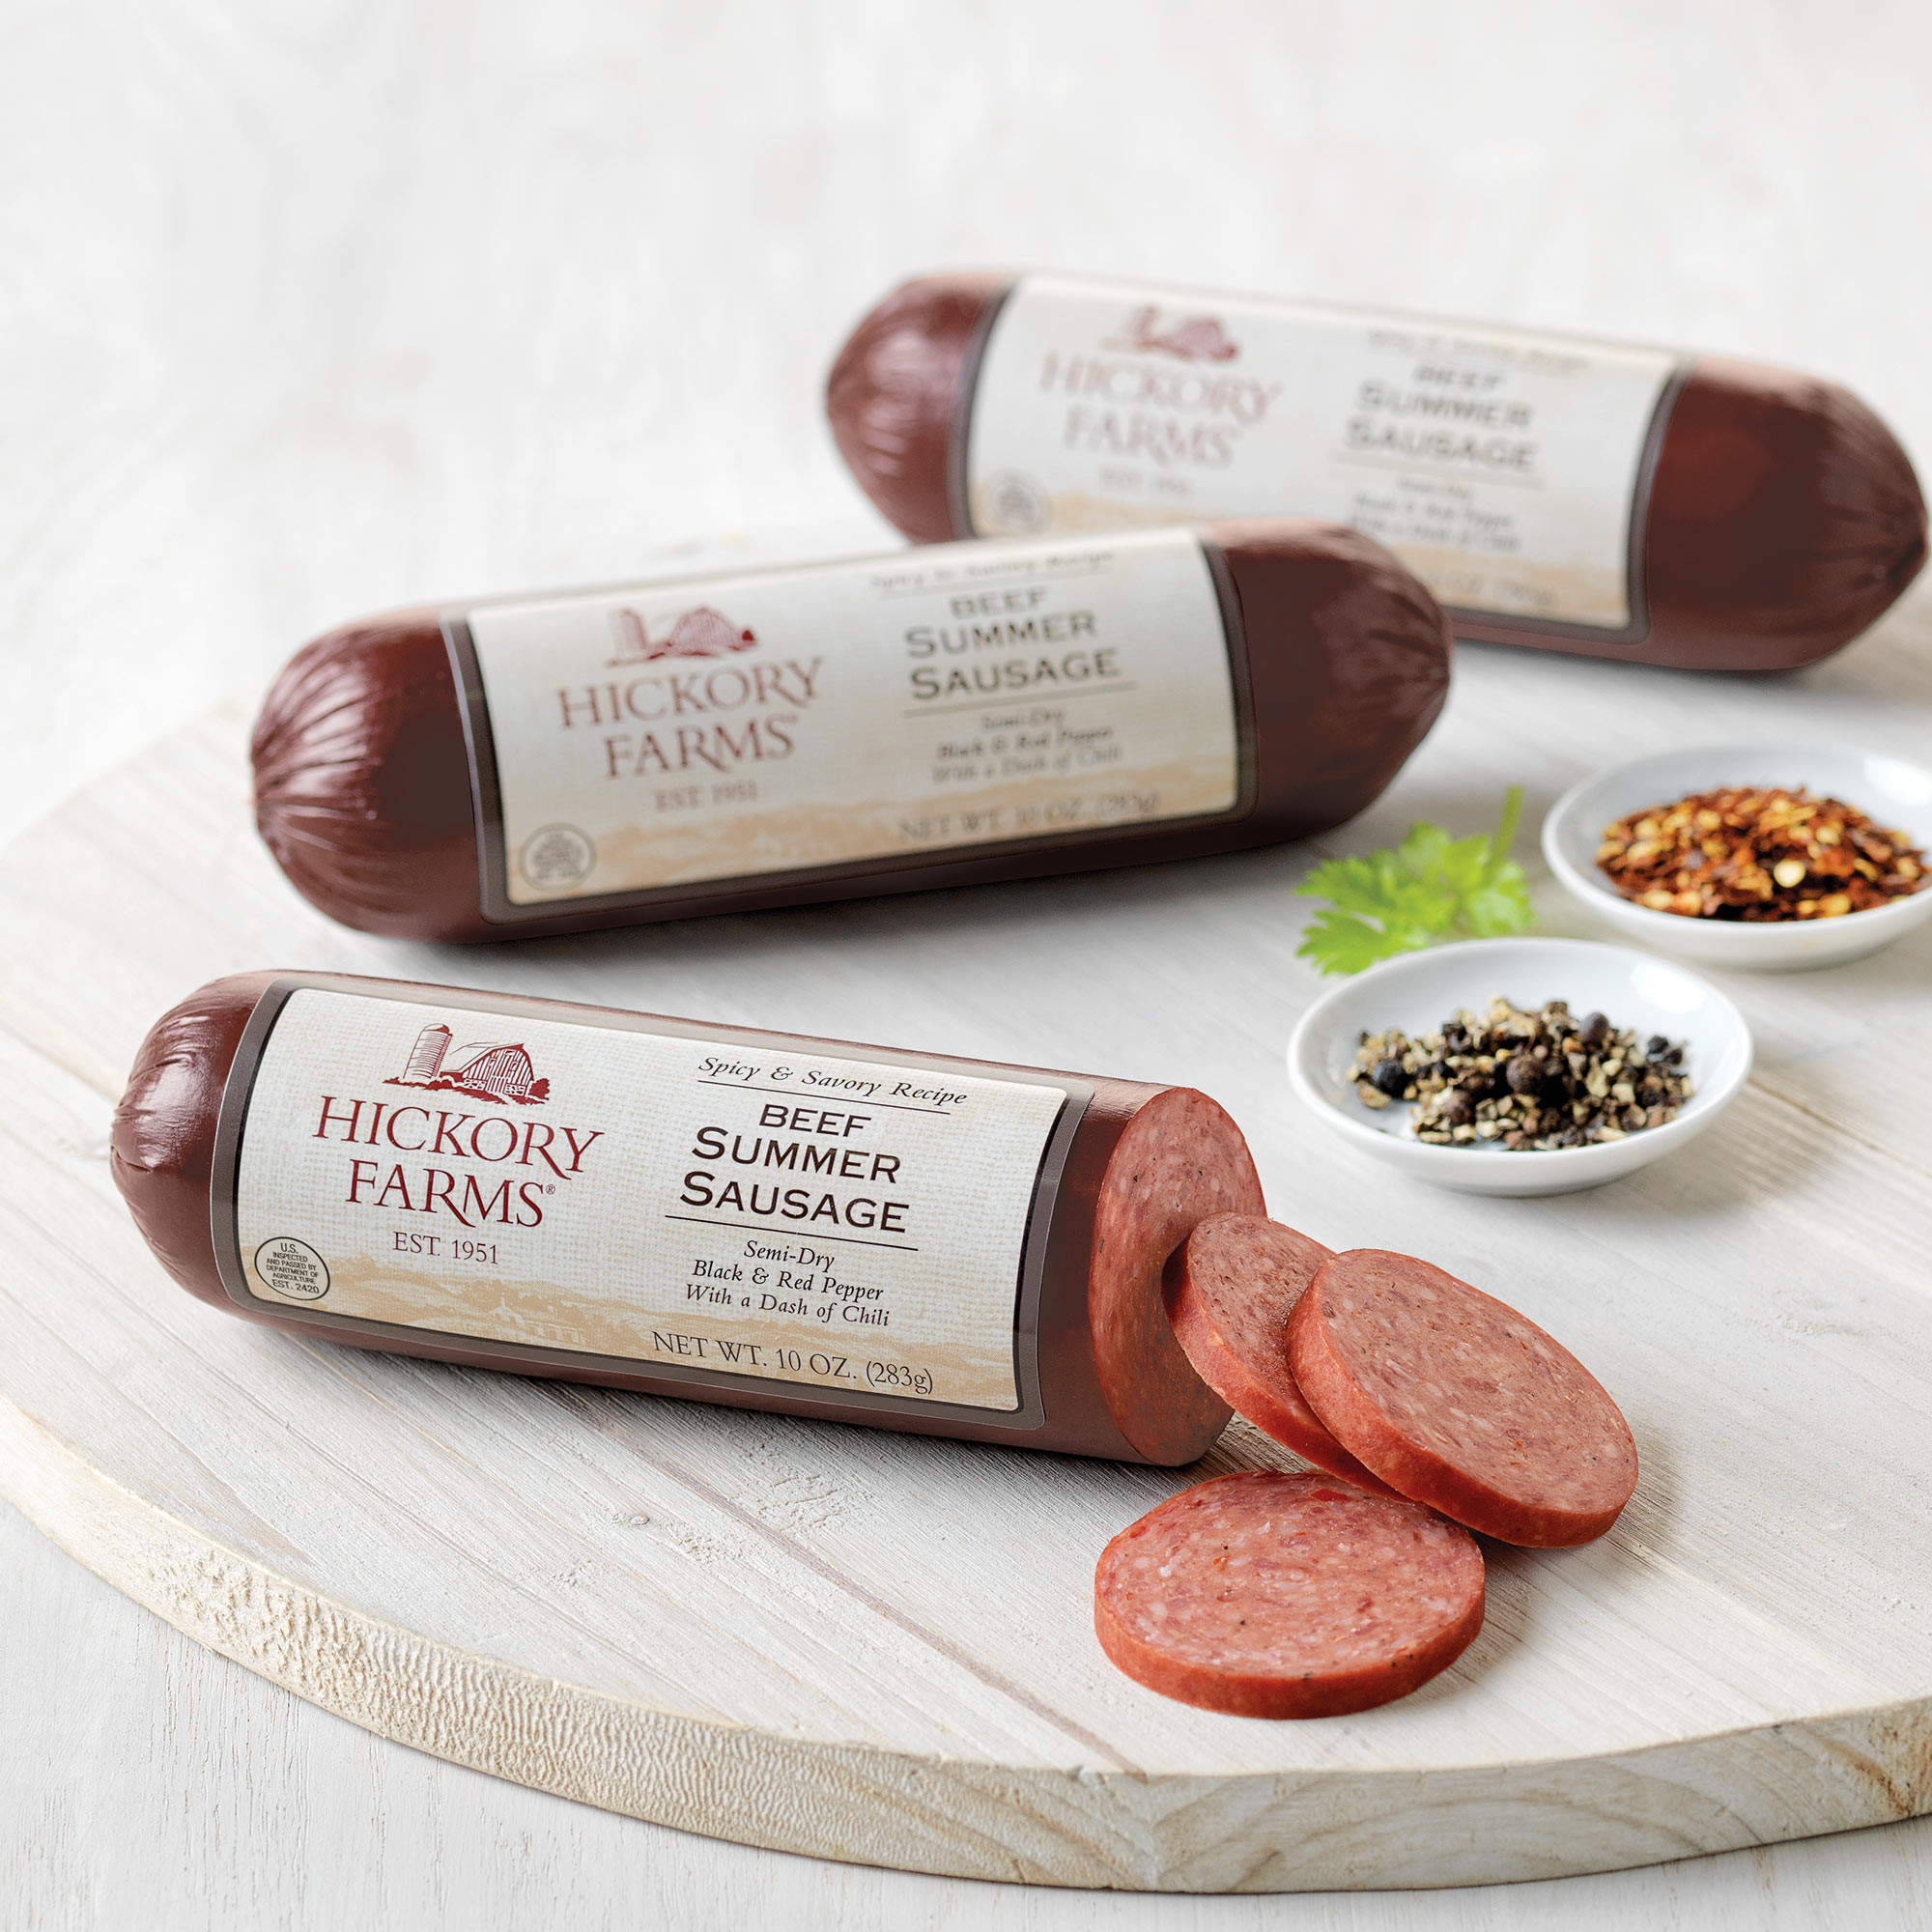 Hickory Farms Beef Summer Sausage
 Spicy Savory Beef Summer Sausage